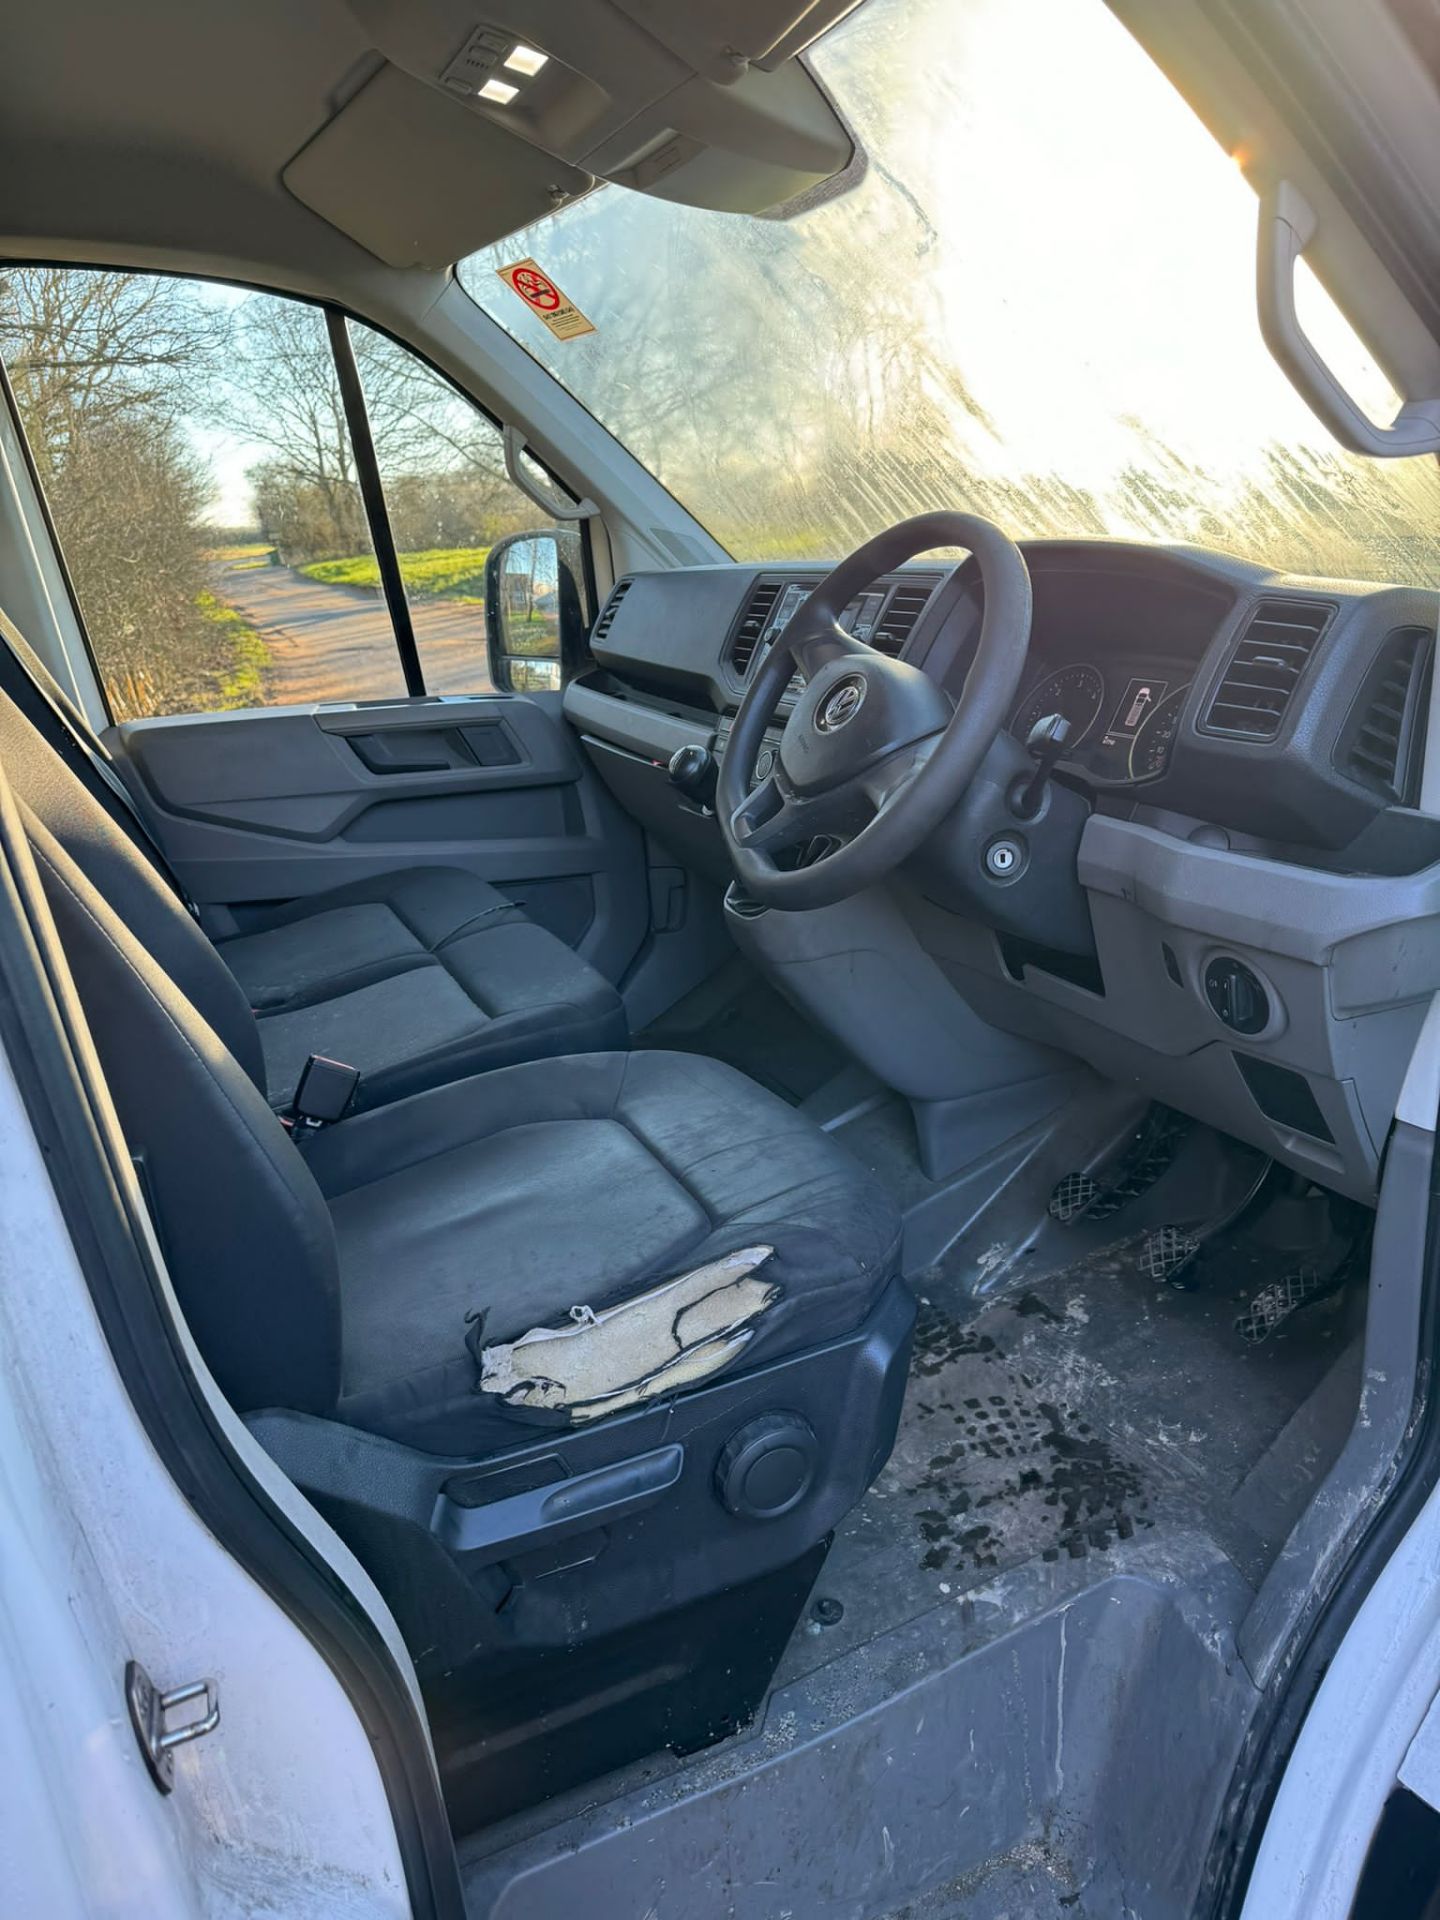 2019 69 VOLKSWAGEN CRAFTER LWB HIGH ROOF PANEL VAN - 87K MILES - PLY LINED. - Image 11 of 11